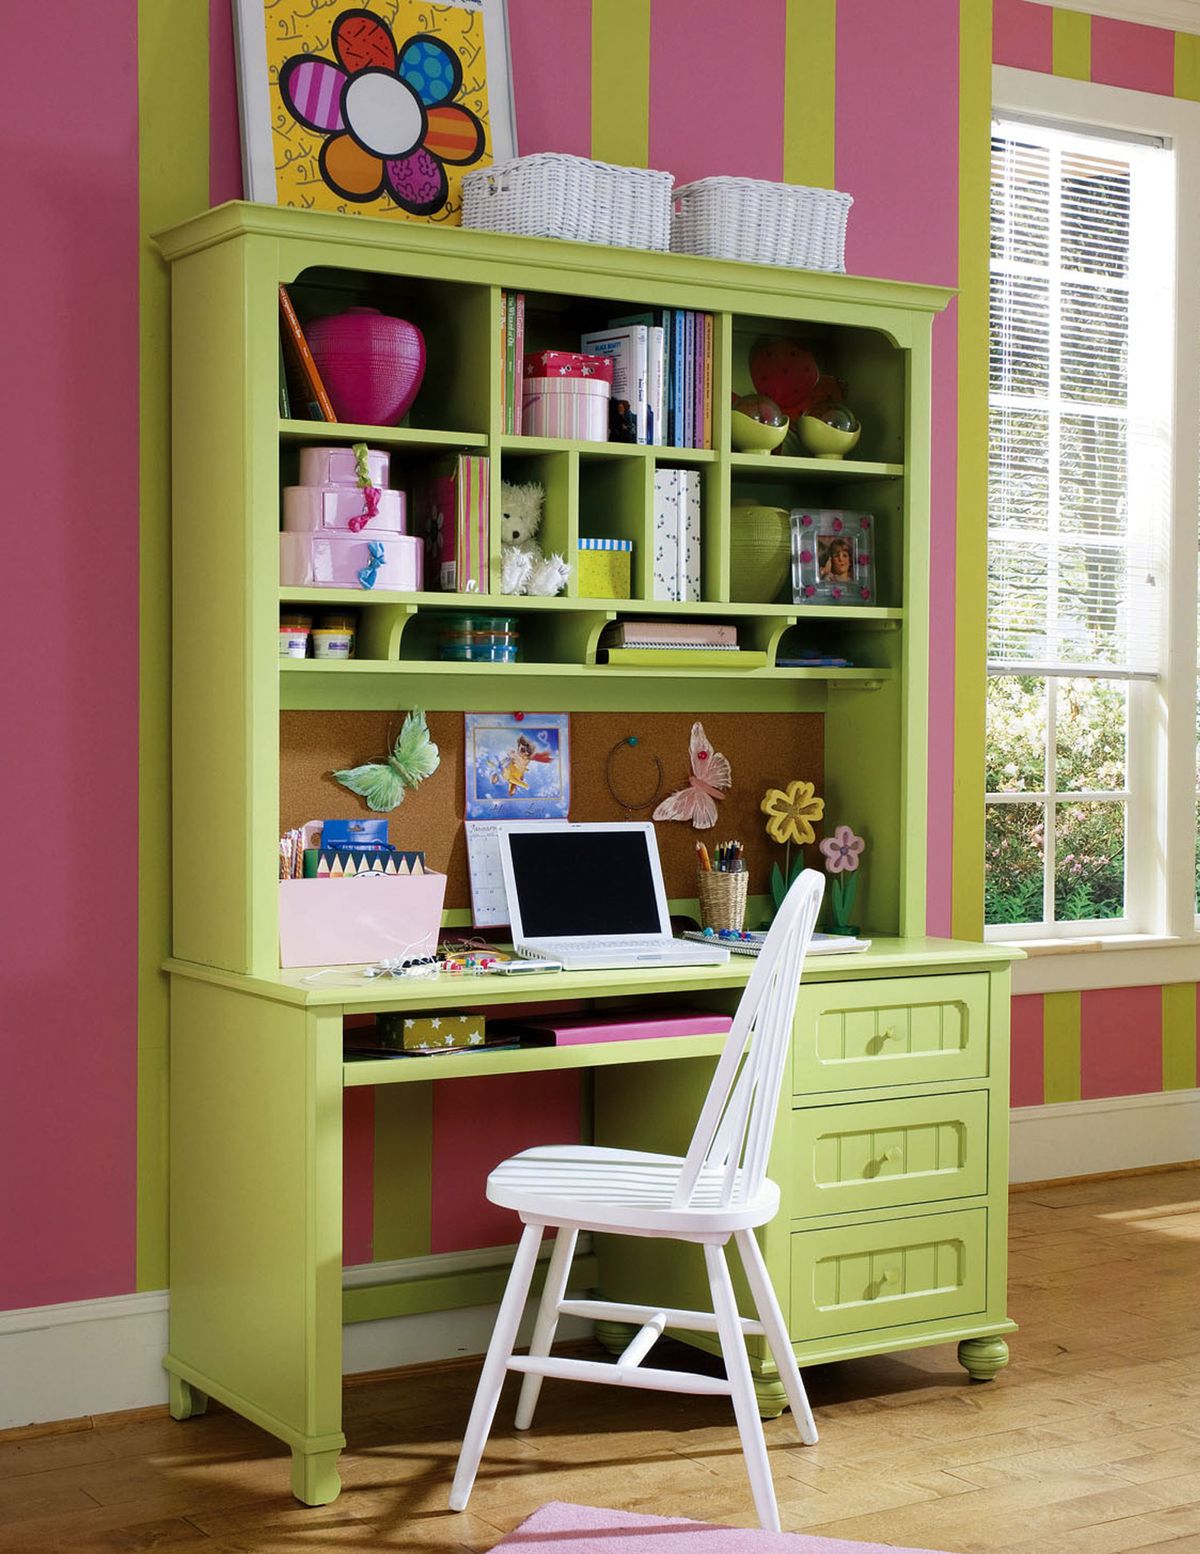 A desk with hutch from Lea Furniture’s Freetime Collection as seen in Gale Steves’ “Right-Sizing Your Home.” While homework space must be functional and well organized, it also should be somewhere the child wants to spend time.